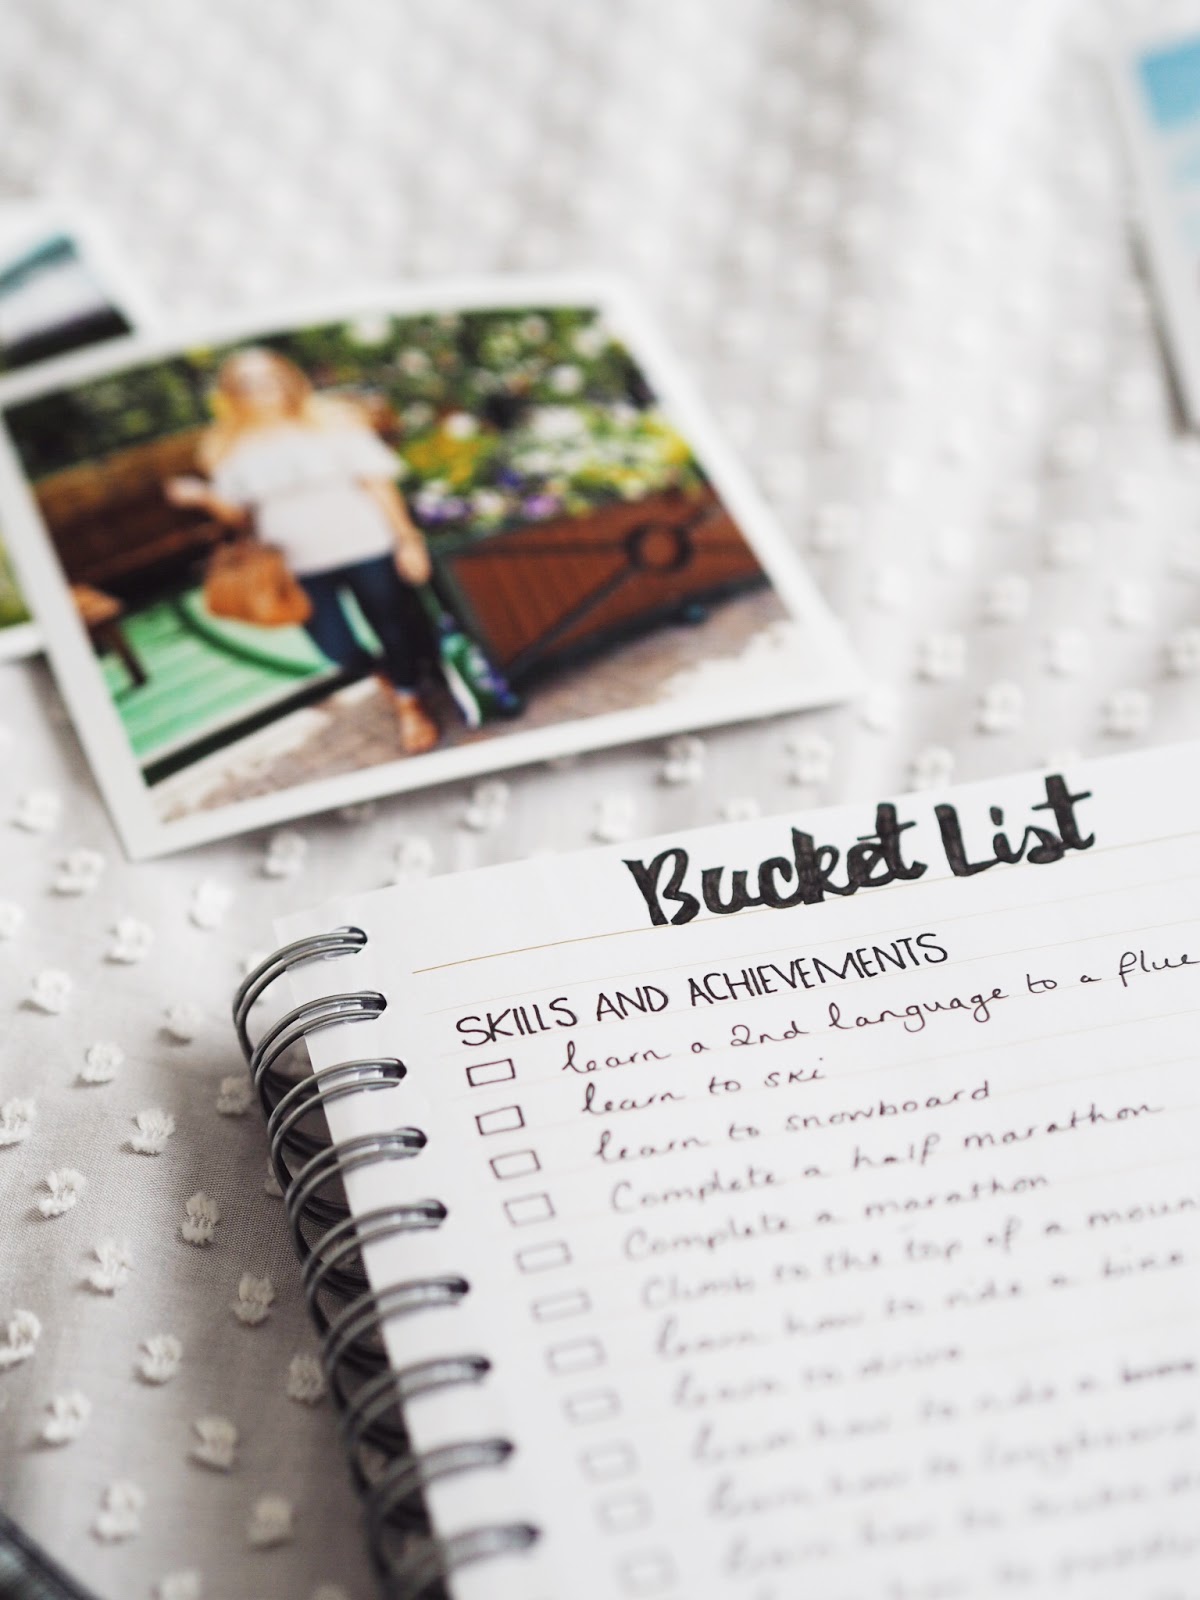 Revising my ultimate Bucket List for 2017